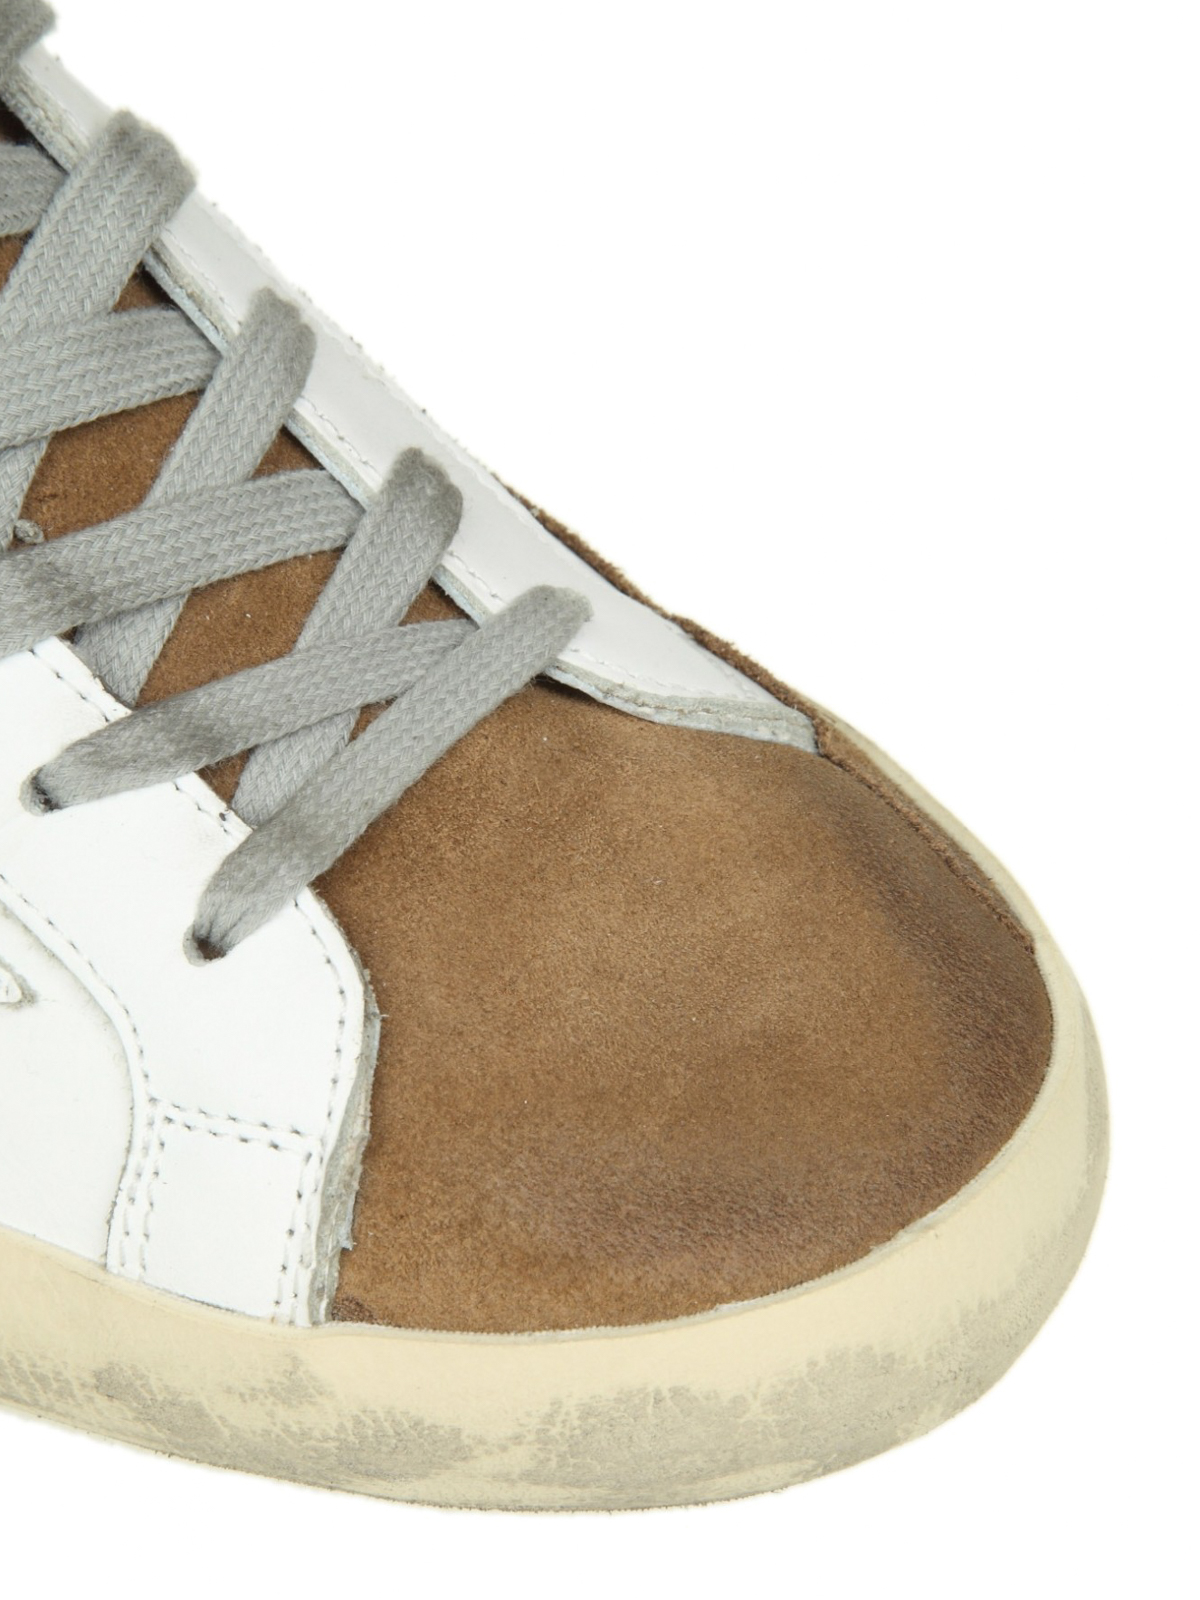 golden goose superstar leather trainers